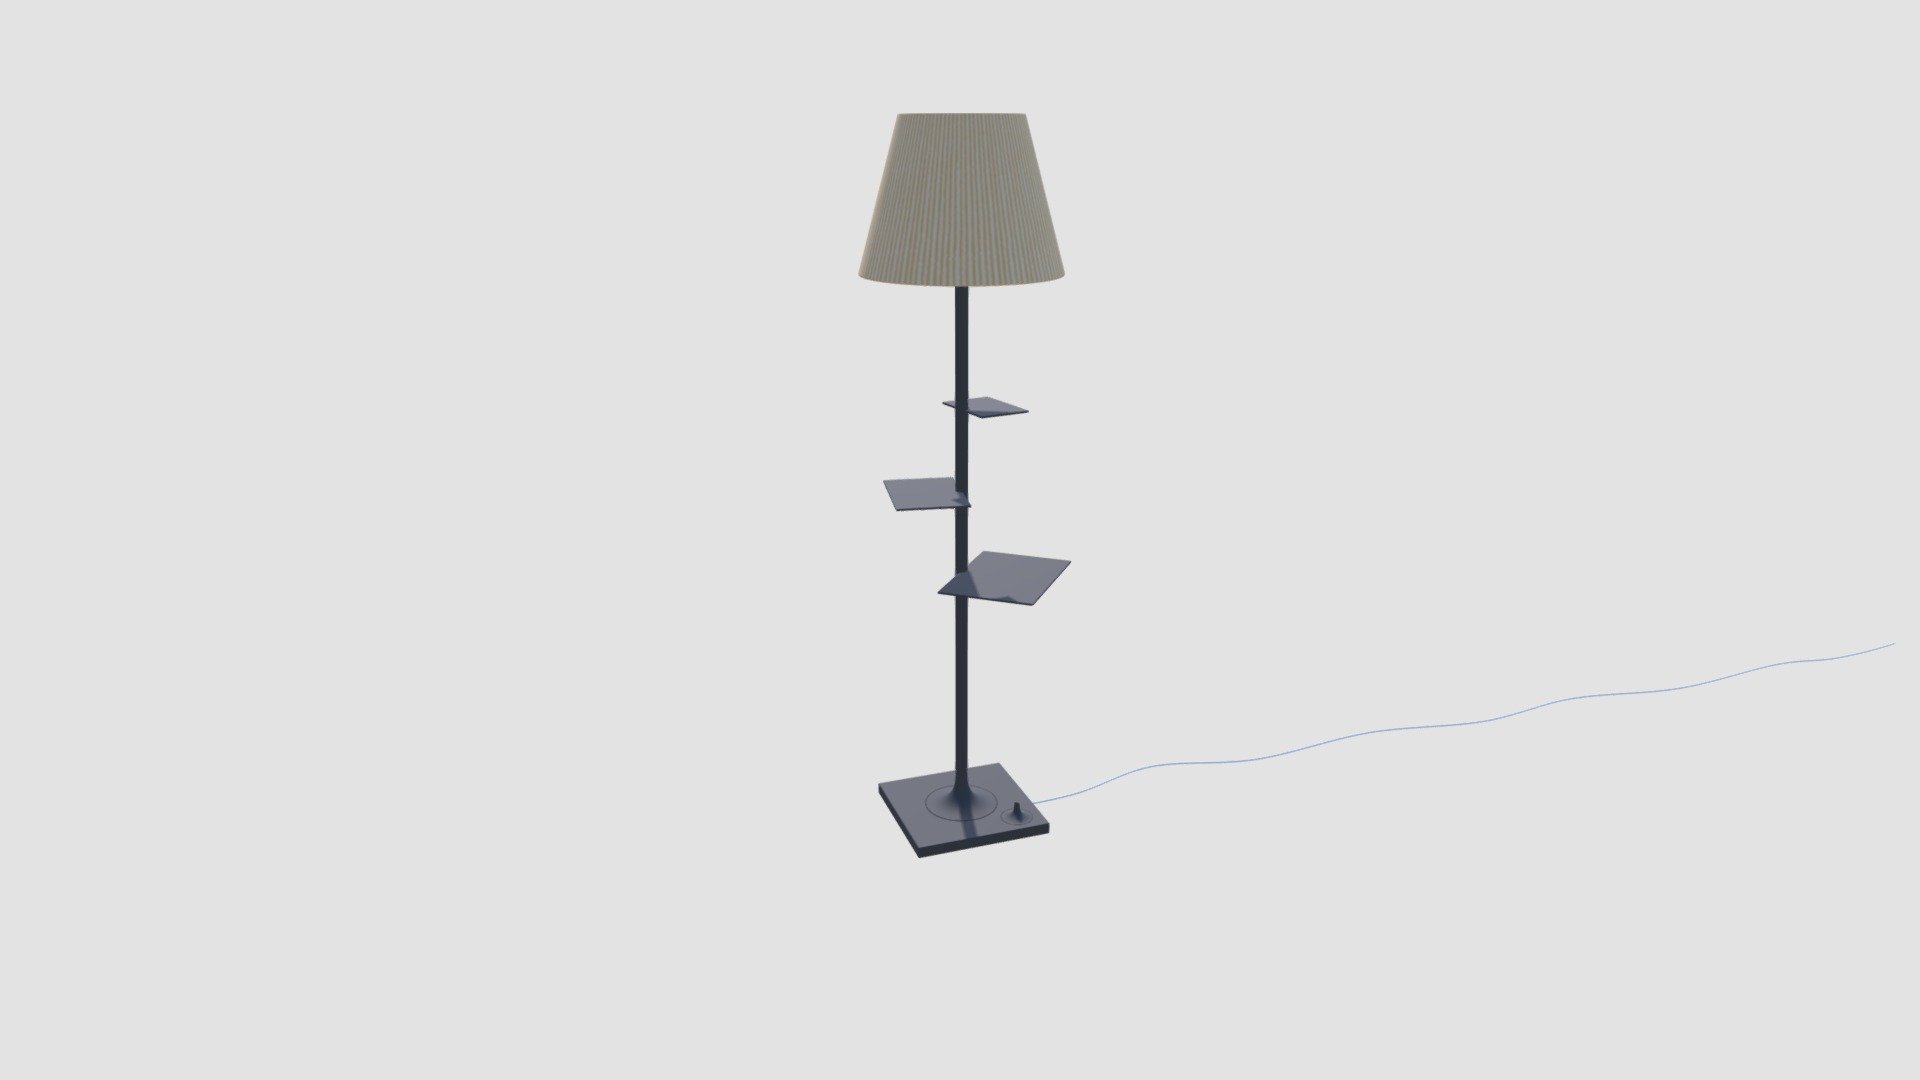 Lamp Buy Royalty Free 3d Model By Evermotion 04ce153 Sketchfab Store 2329